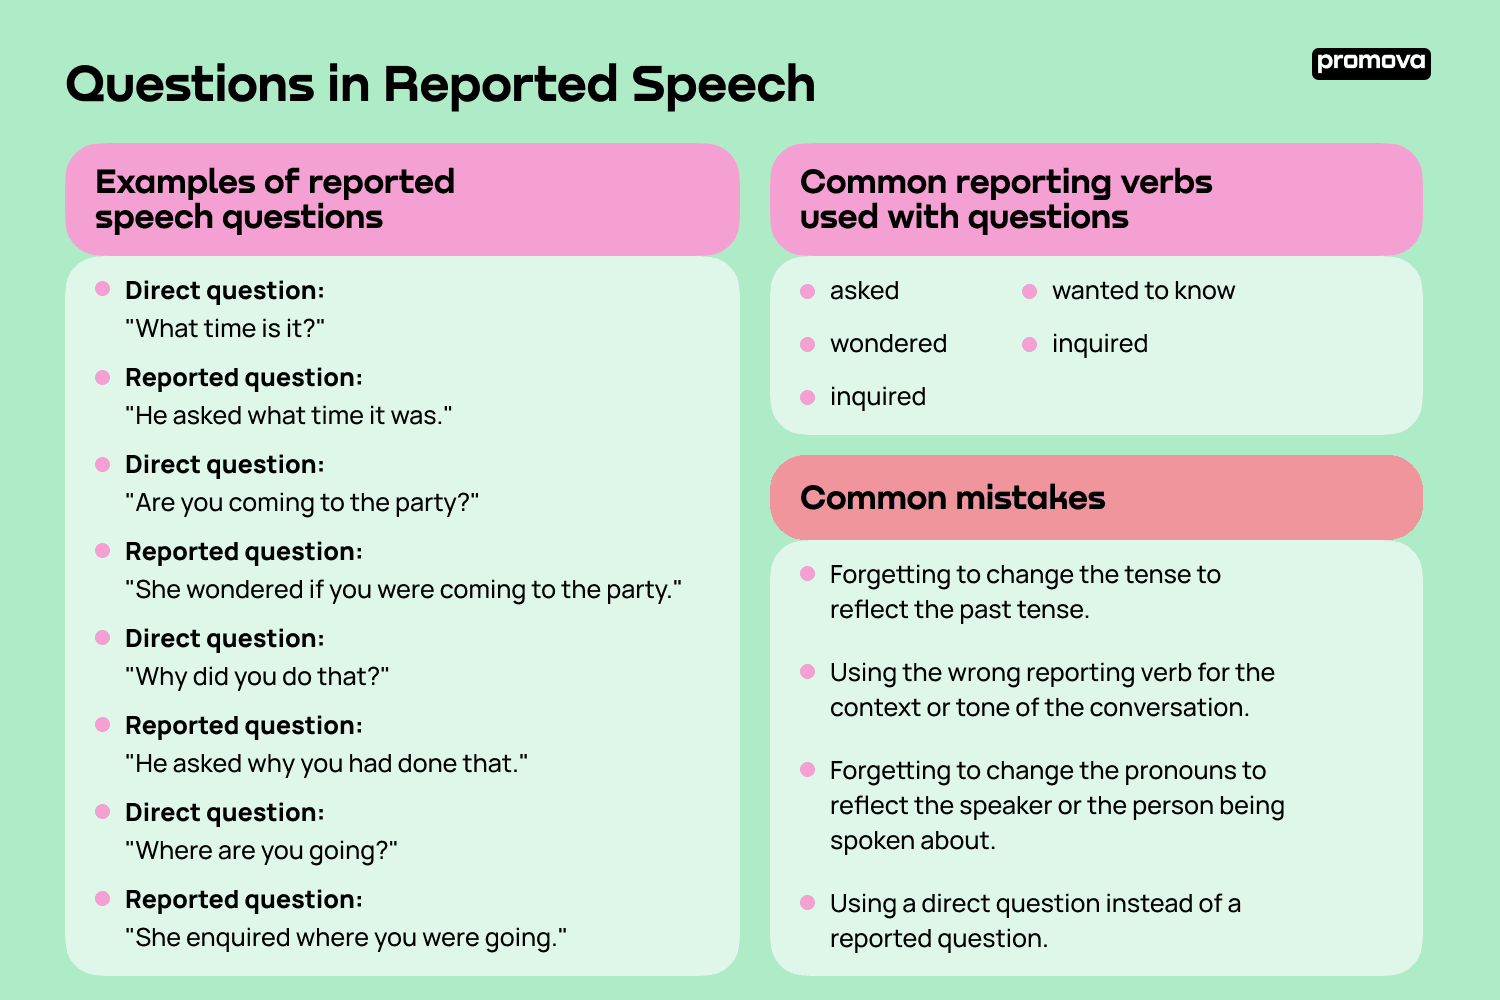 Examples of reported speech questions